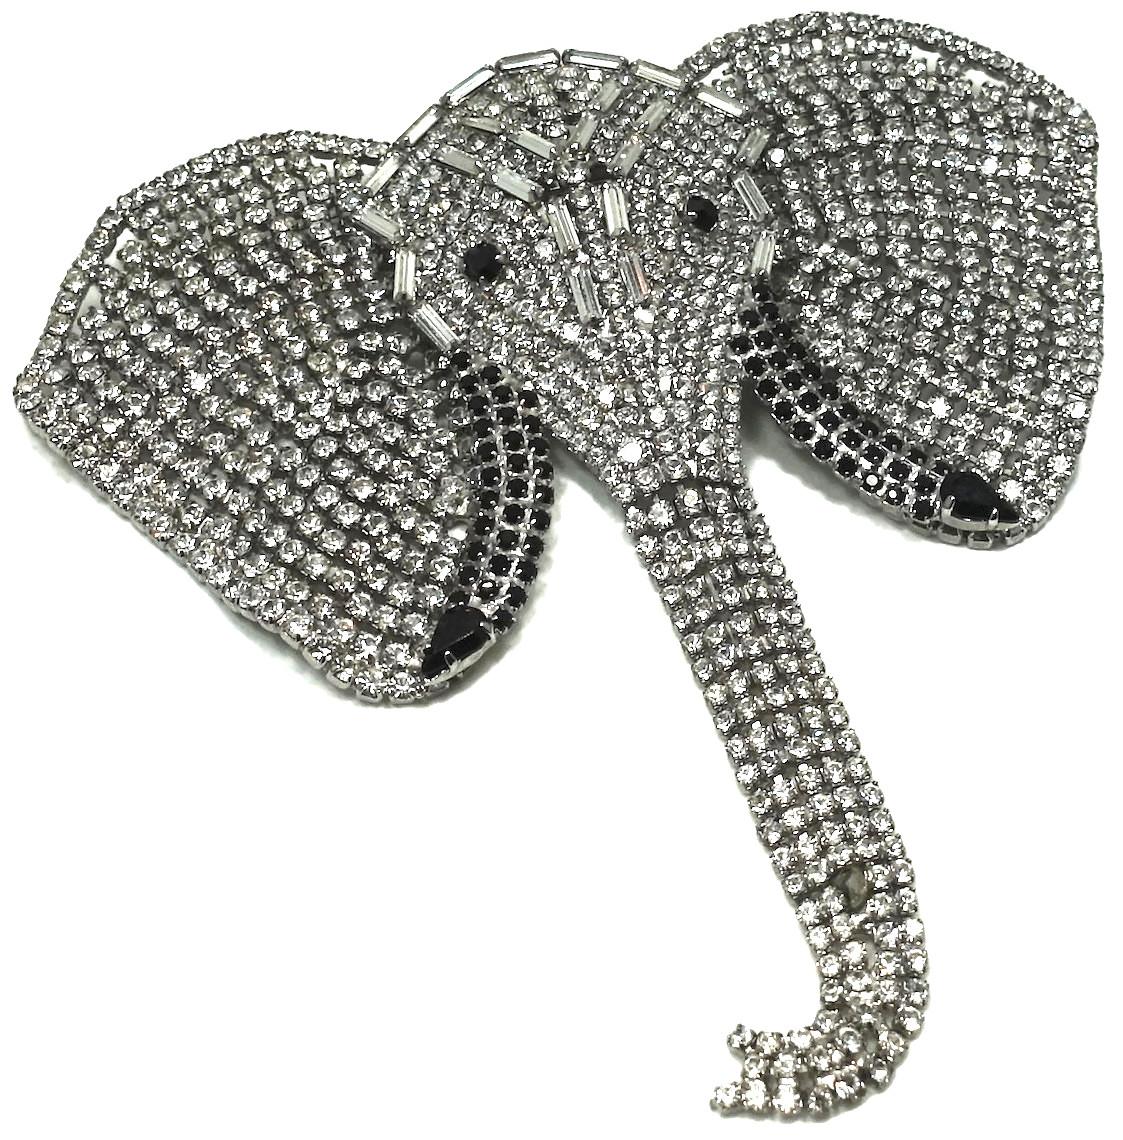 This vintage Butler & Wilton elephant brooch is famous.   The head, ears and trunk are completely covered with crystals. Its eyes have black crystals. In excellent condition, this brooch measures 4-1/2” x 4-3/4” and is signed “B&W” (Butler & Wilson).